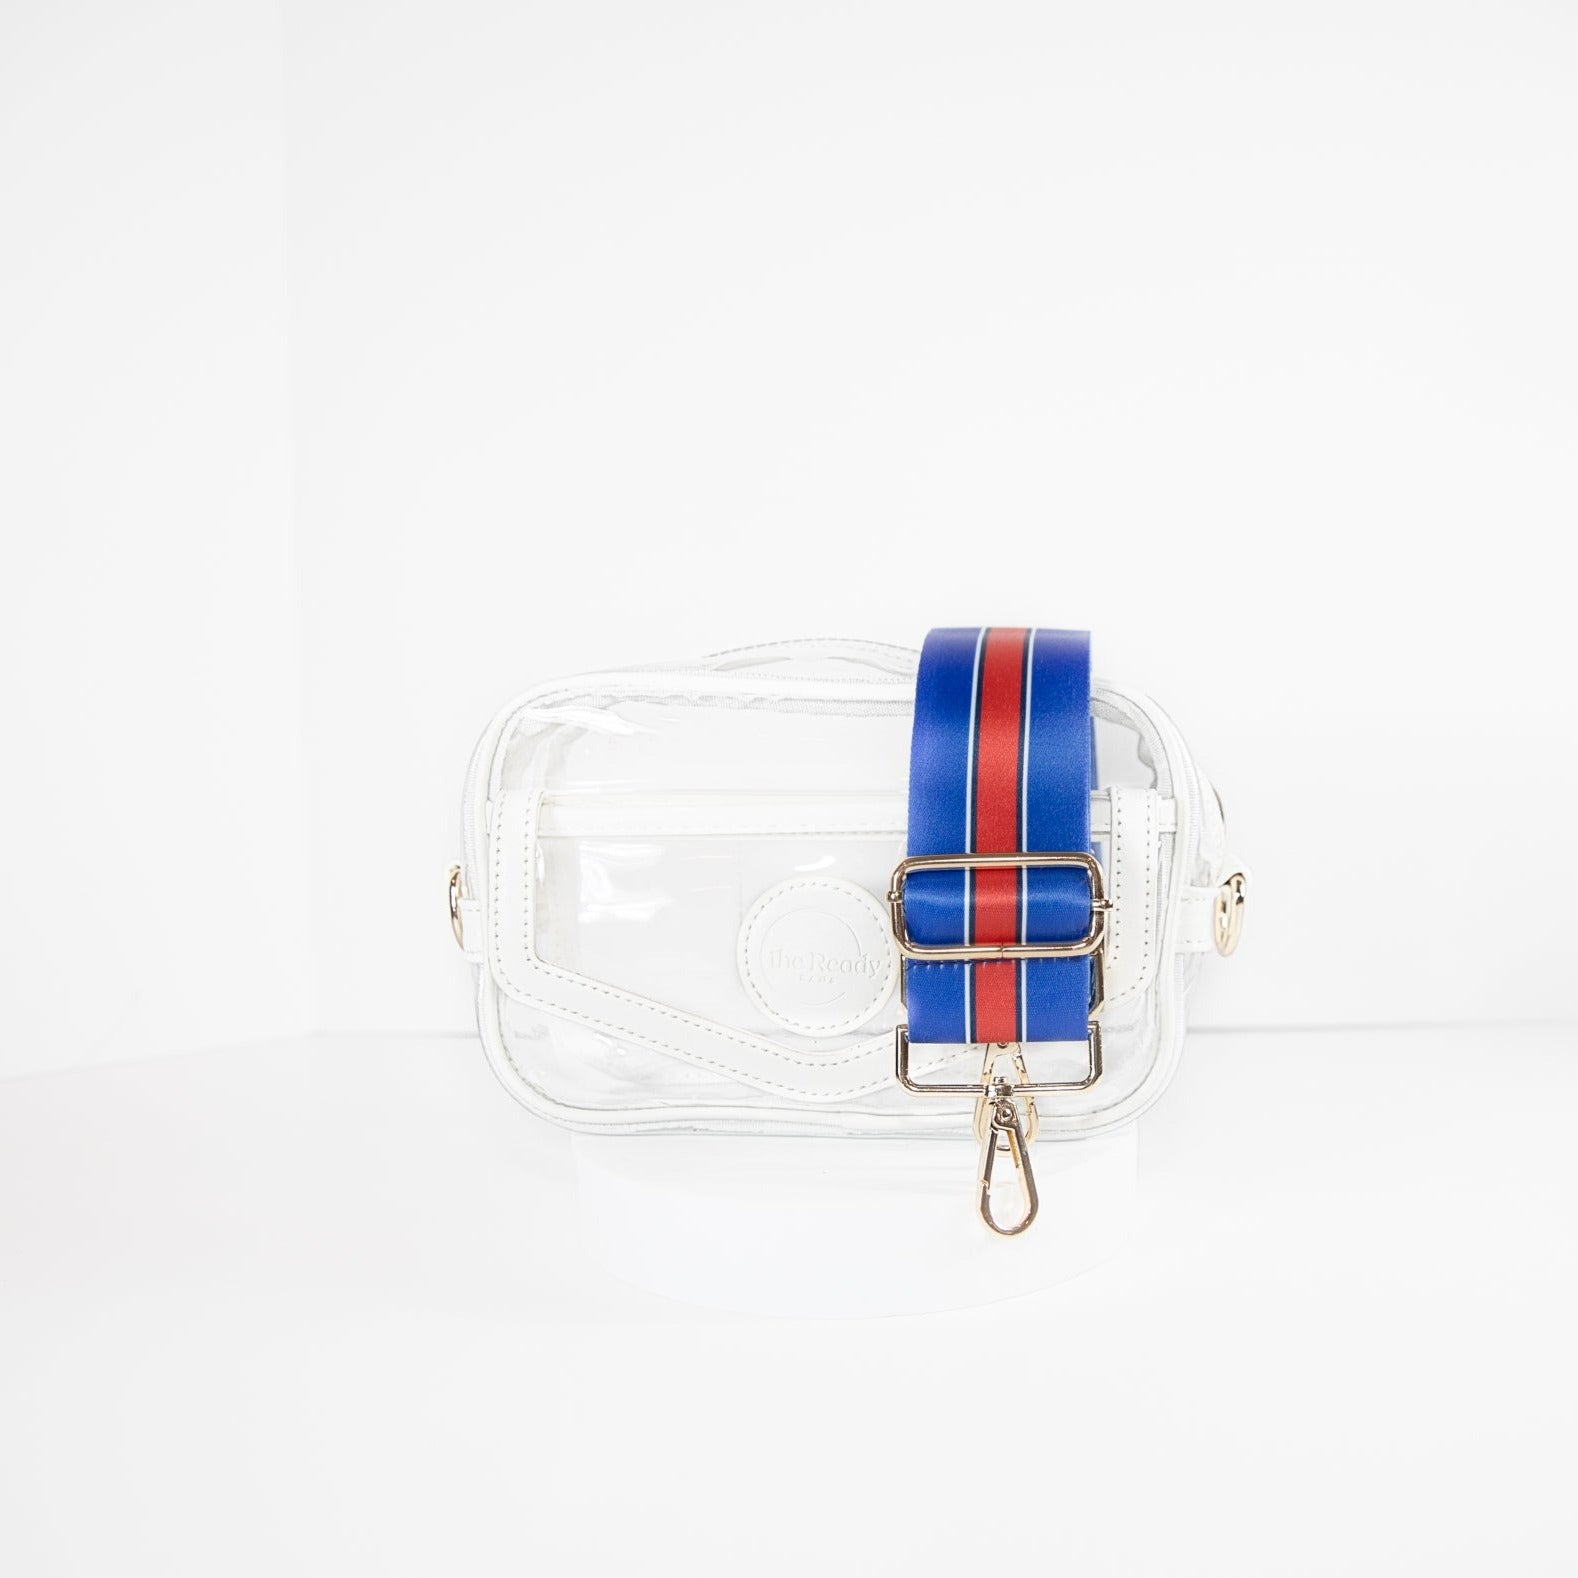 Clear stadium bag with white leather trim, front facing, with a crossbody strap in Buffalo Bills colors.